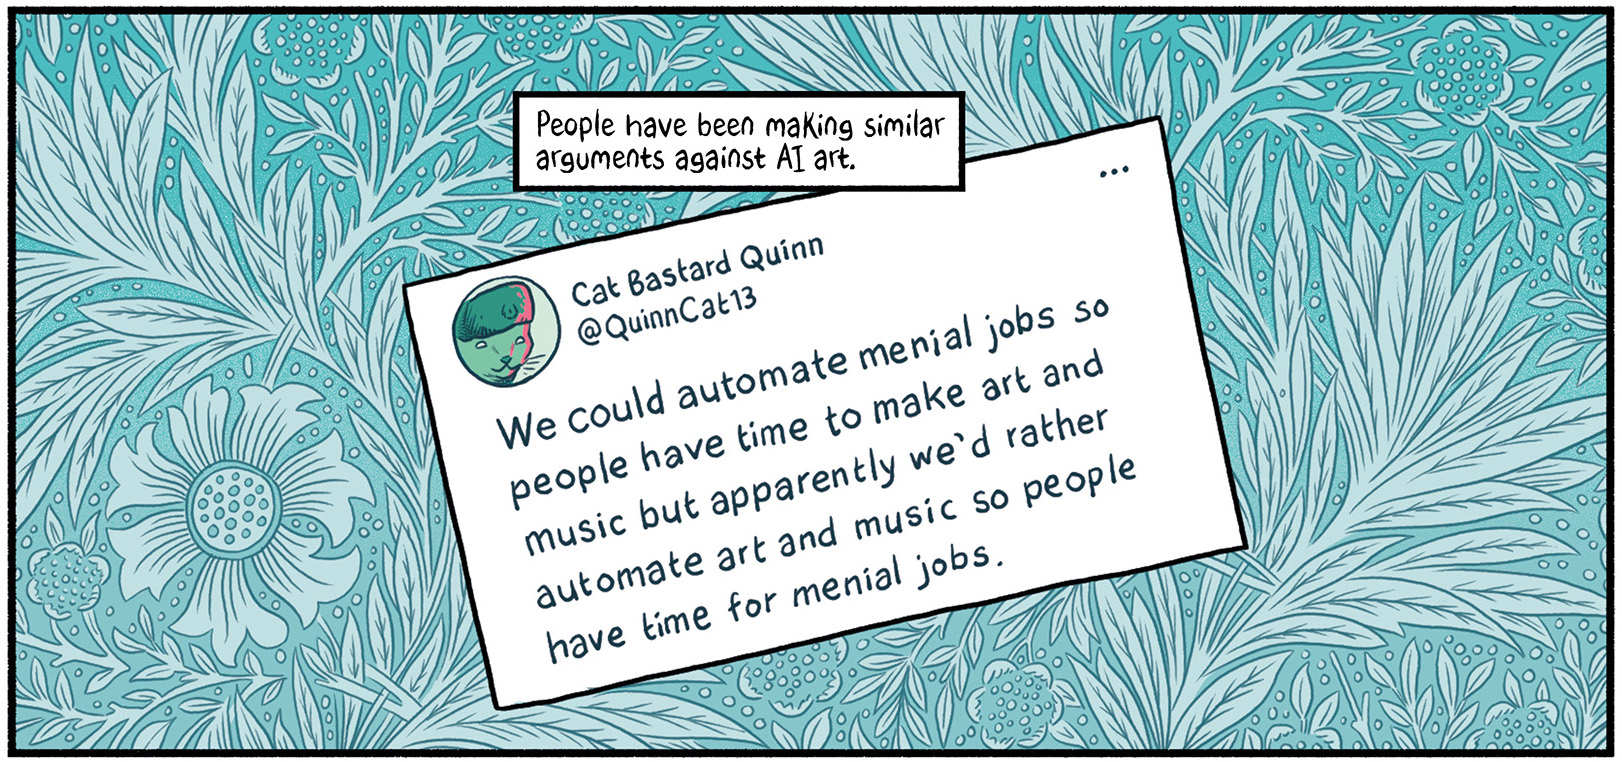 The text reads, "People have been making similar arguments against AI art." A tweet from CatBastardQuinn, @QuinnCat13 reads, "We could automate menial jobs so people have time to make art and music but apparently we'd rather automate art and music so people have time for menial jobs."